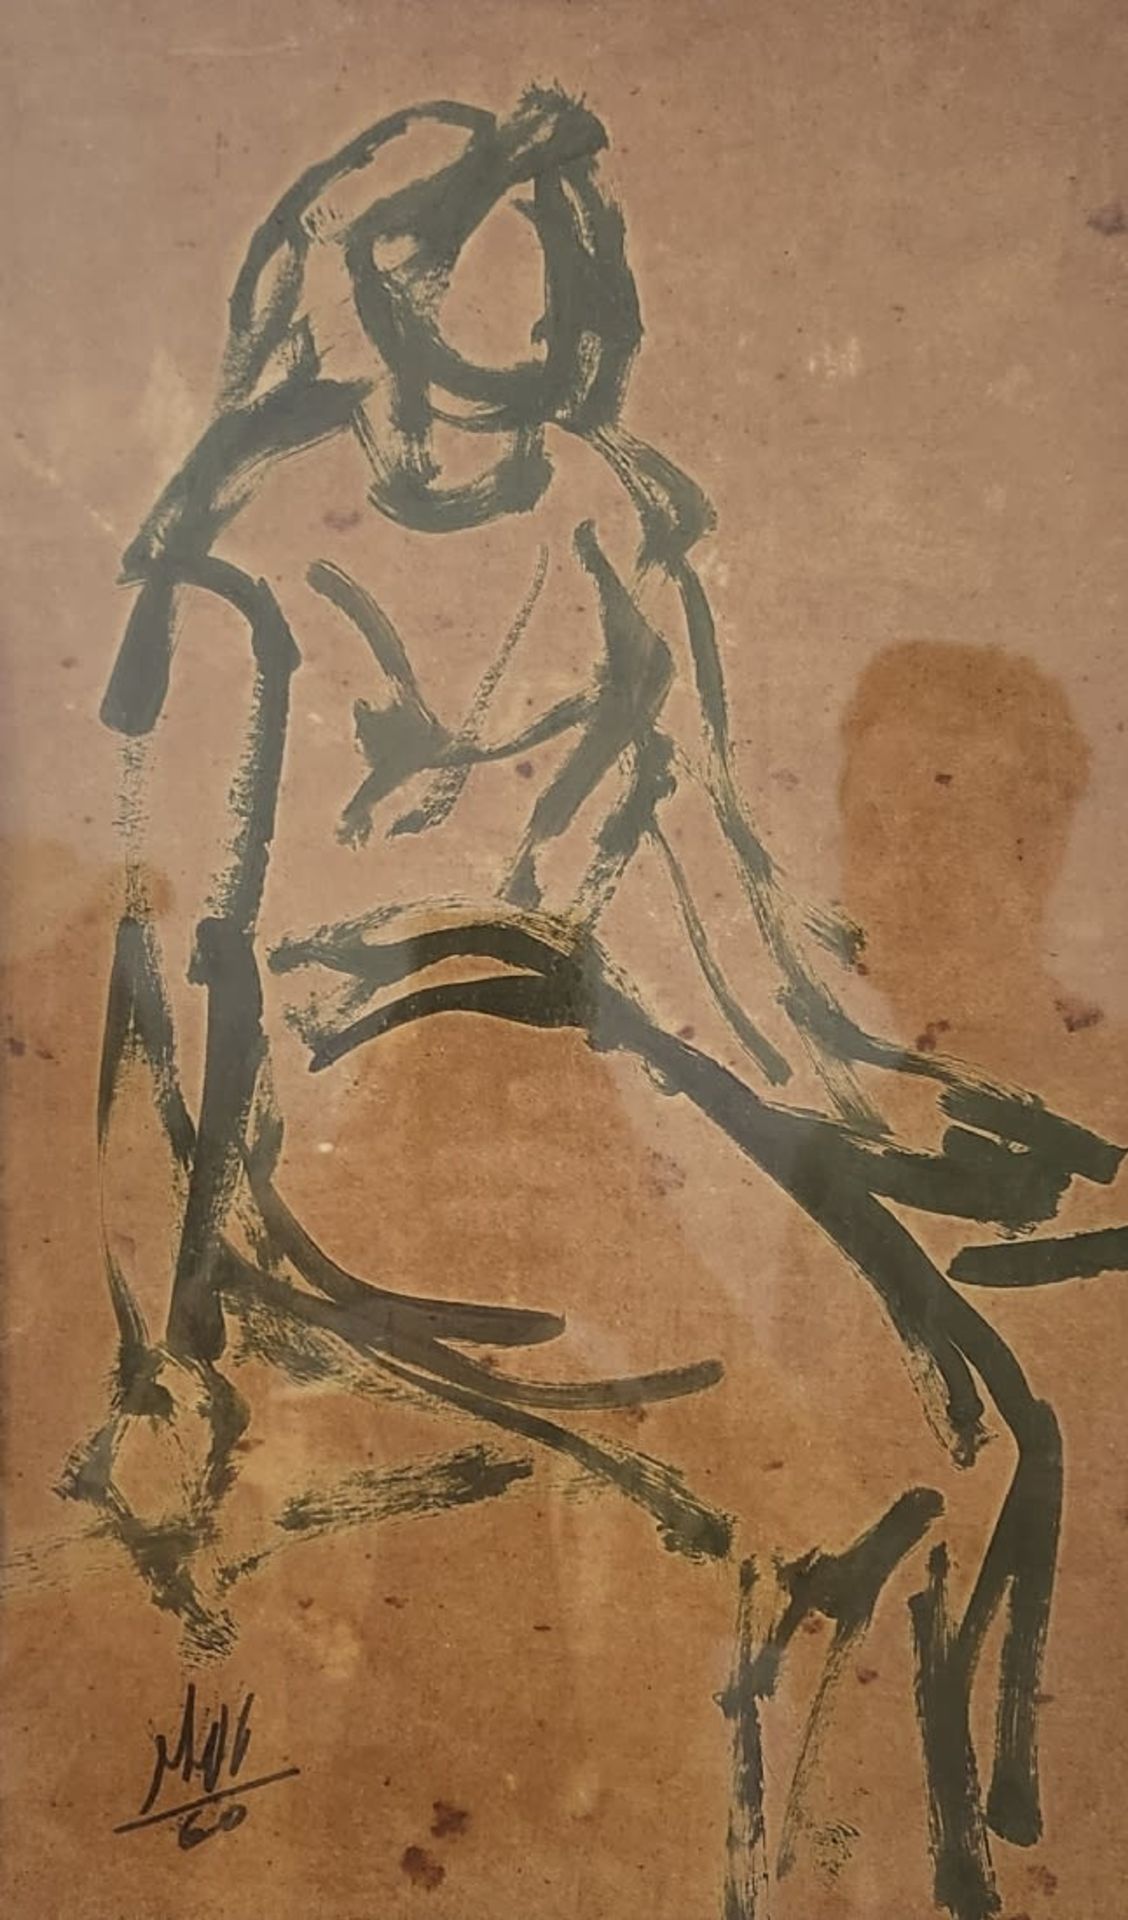 "Sitting on beige" - painting, samuel Tepler - gouache on paper, signed and dated 1960.